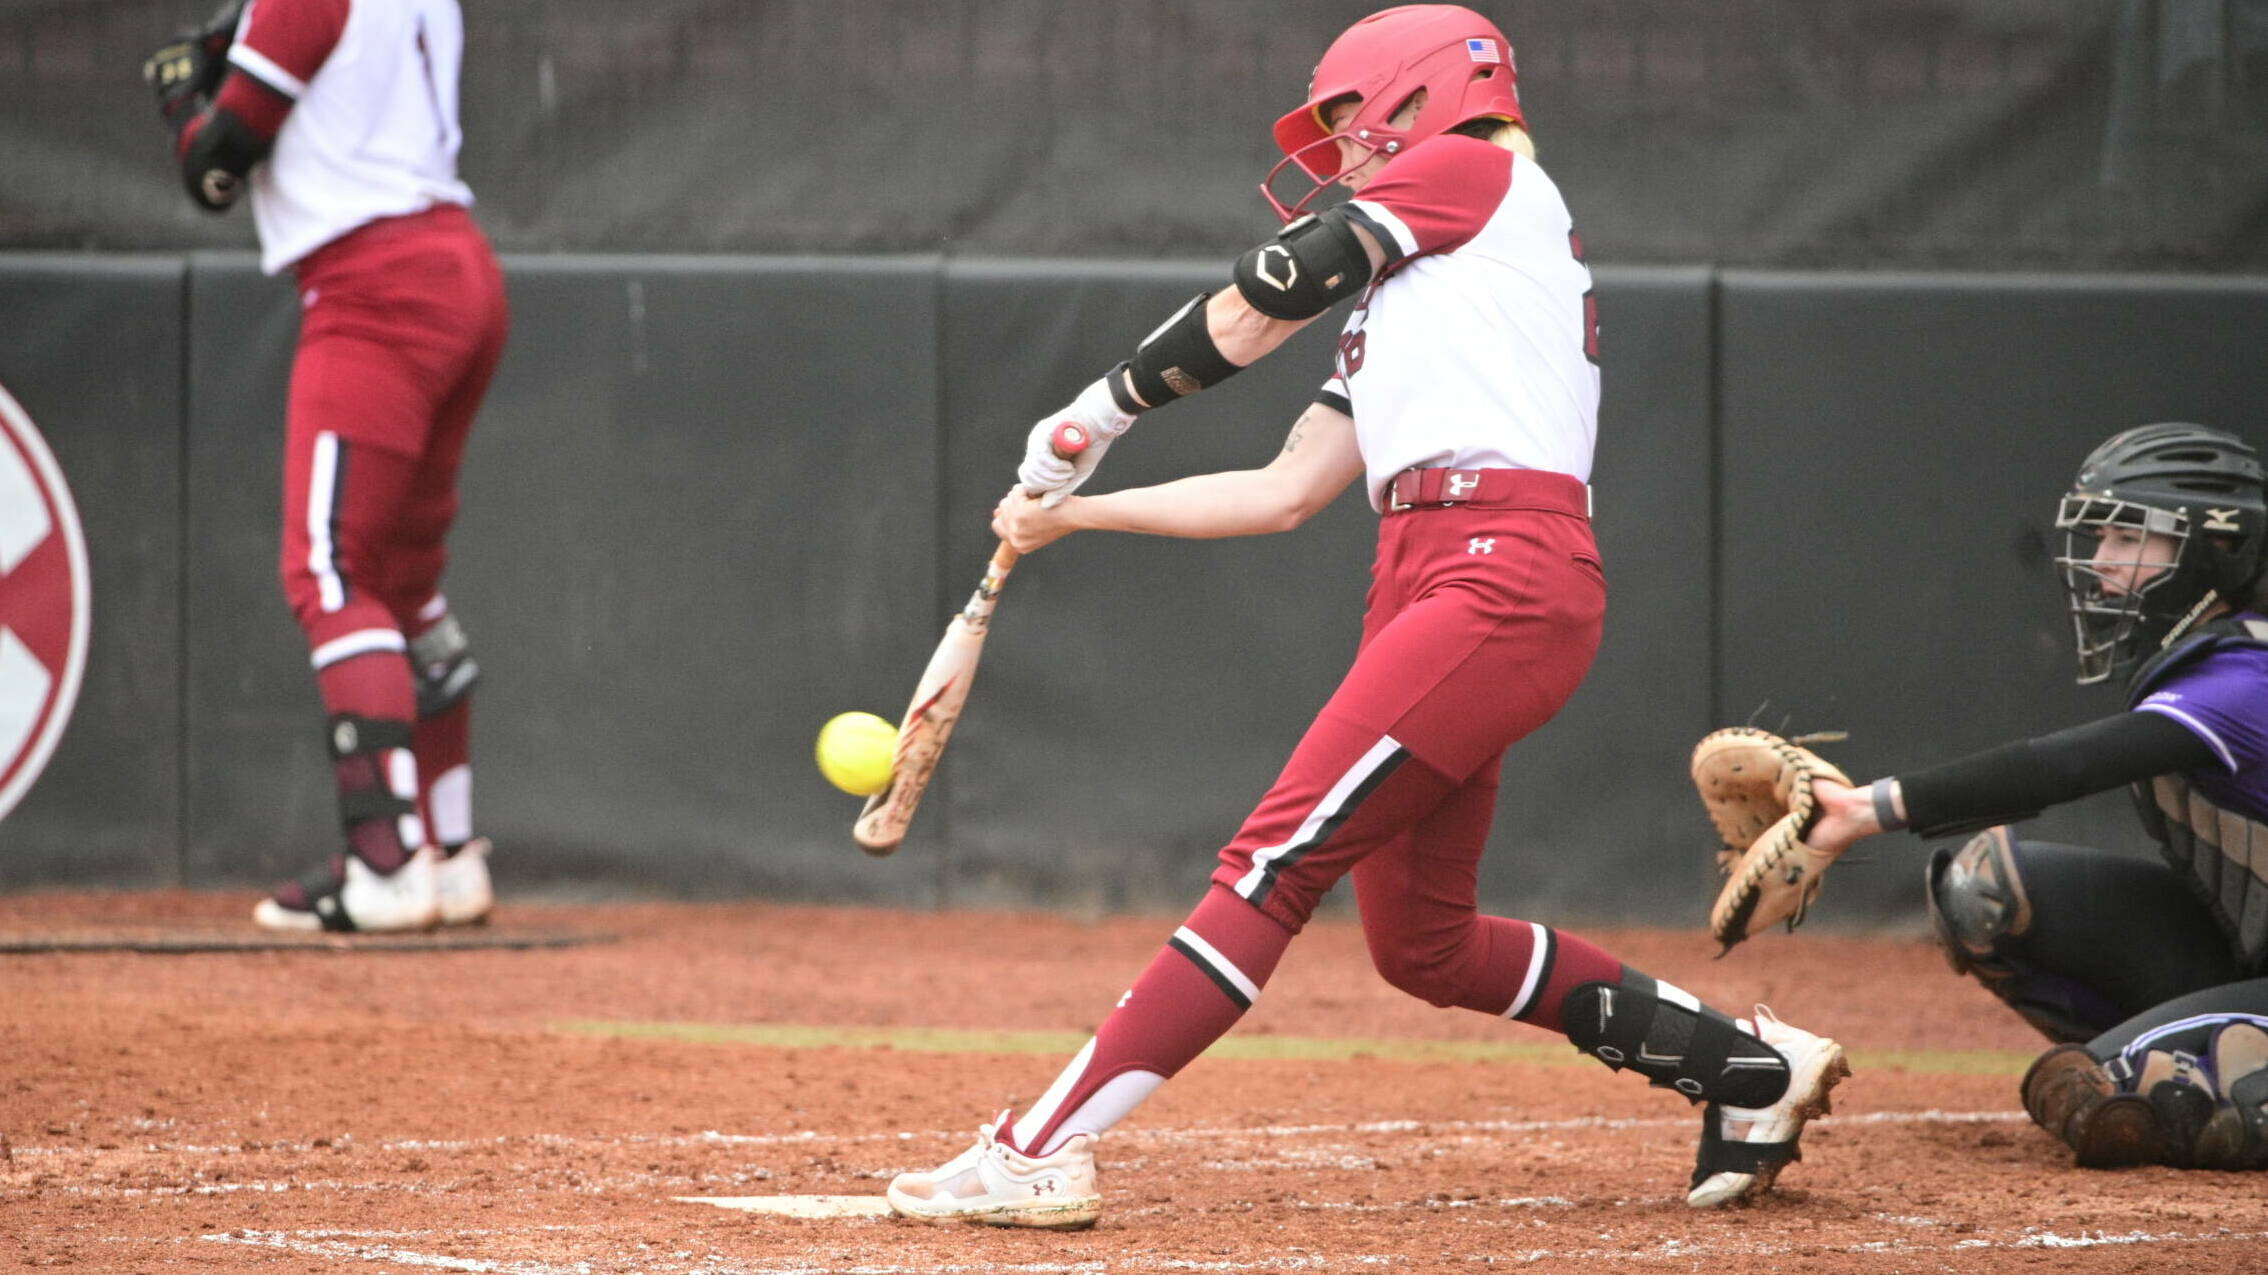 Softball Makes Quick Work with Run-Rule Victory